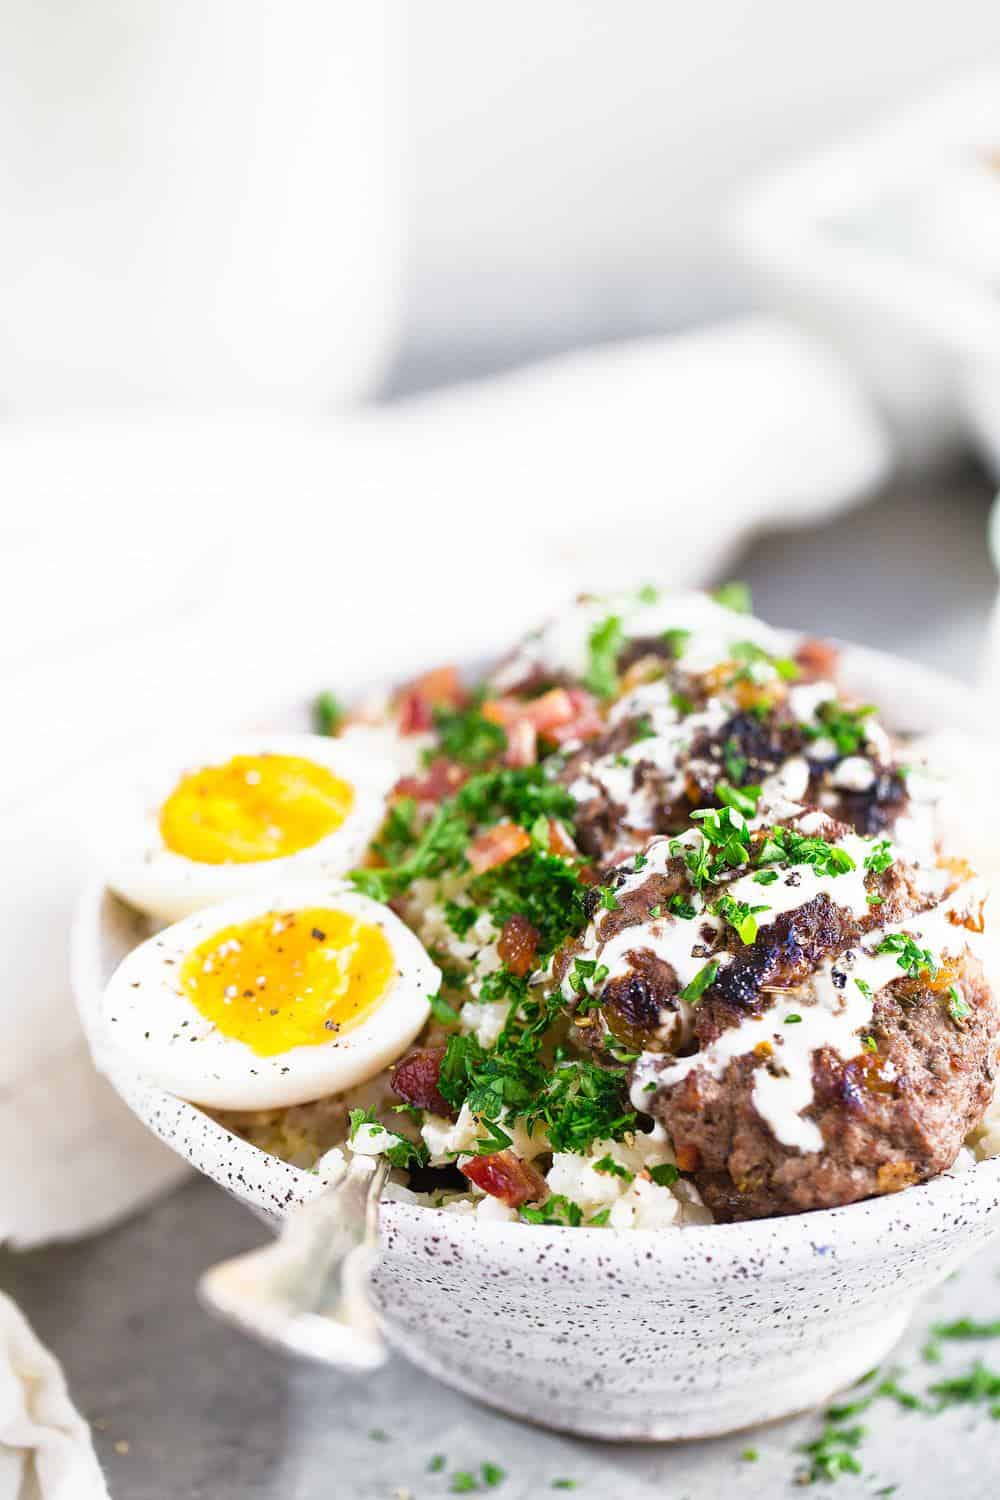 Whole30 Beef and Bacon Breakfast Bowl. THE BEST beef and bacon breakfast bowl! Loaded up with fresh herbs, soft boiled eggs, a creamy tahini sauce & laid on a bed of cauliflower rice. whole30 breakfast recipe. whole30 bowl recipe. whole30 breakfast bowl. whole30 beef recipes. whole30 meal plan. Easy whole30 dinner recipes. Easy whole30 breakfast recipes. Whole30 recipes. Whole30 lunch. Whole30 meal planning. Whole30 meal prep. Healthy paleo meals. Healthy Whole30 recipes. Easy Whole30 recipes.